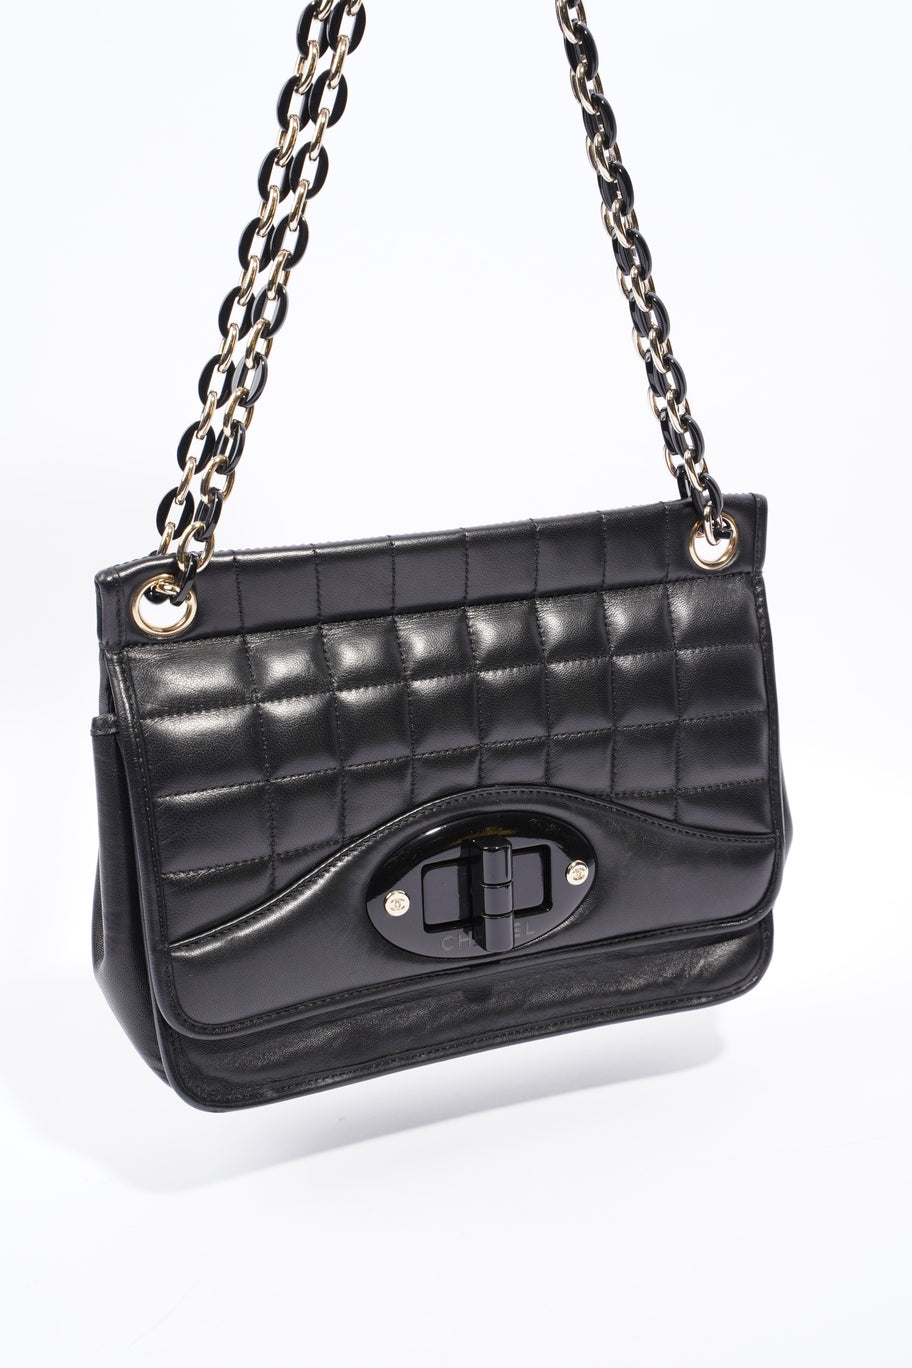 Chain Flap Black Leather Image 16